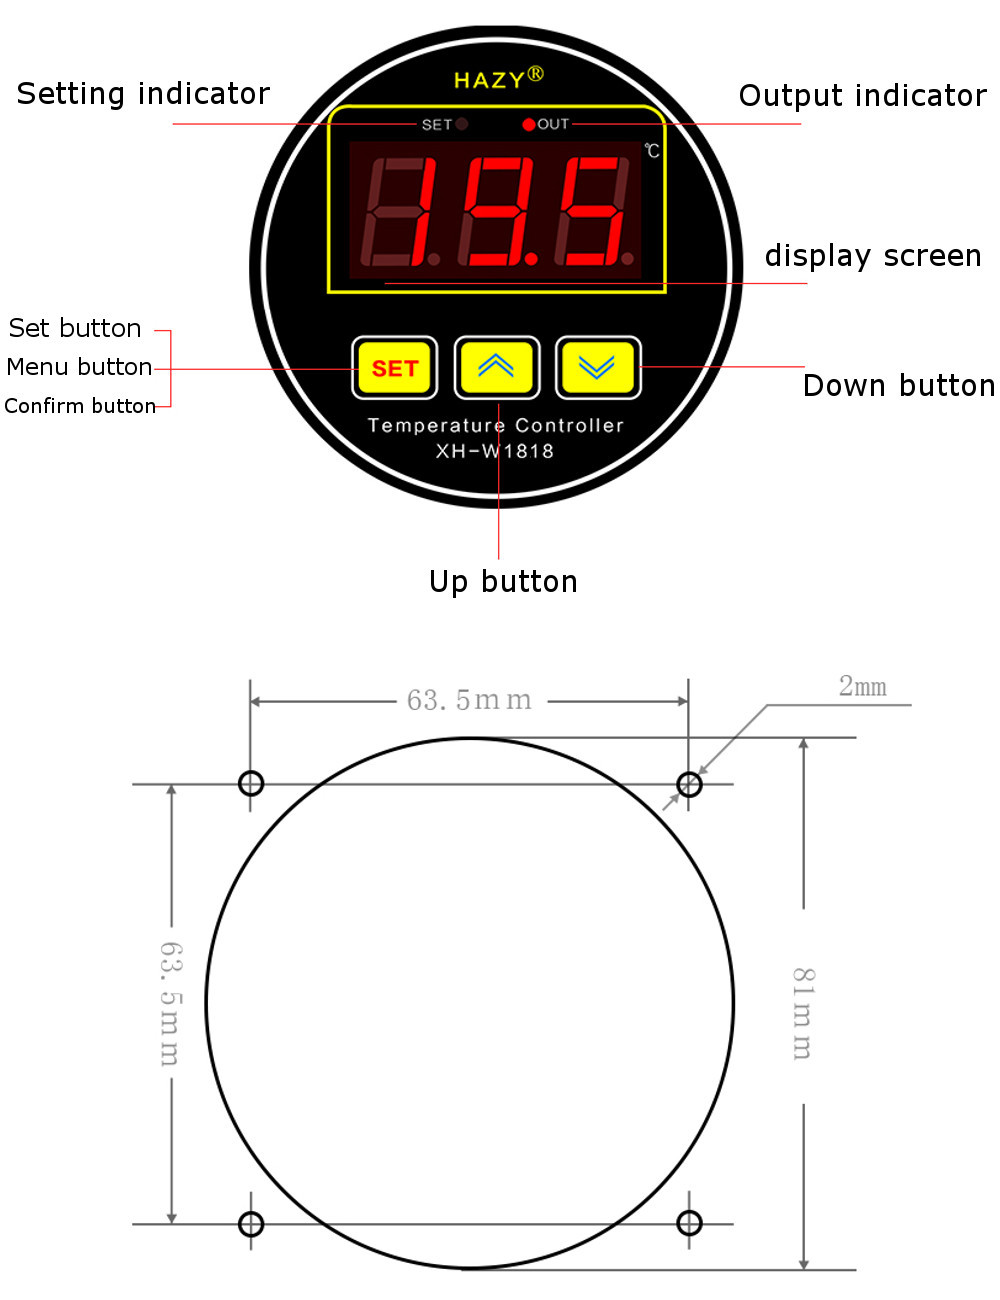 XH-W1818-High-Precision-Microcomputer-Temperature-Controller-Circular-Digital-Display-Embedded-Therm-1590312